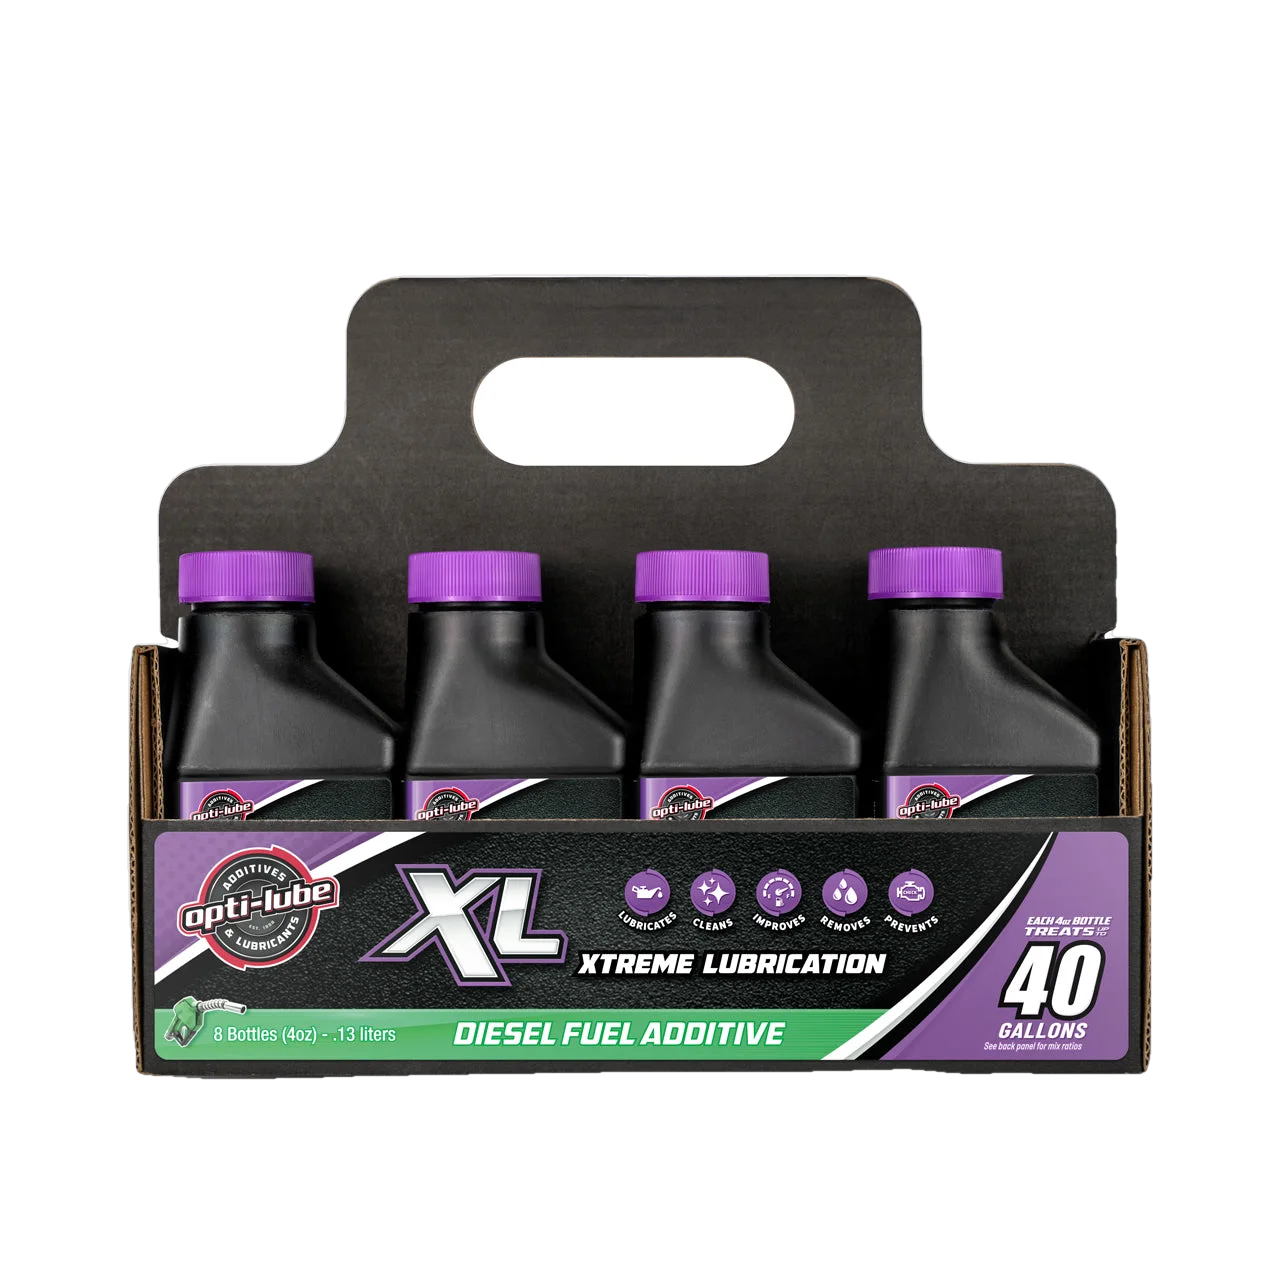 Opti-Lube XL Xtreme Lubricant Diesel Fuel Additive: 4oz 8 Pack, Treats up to 40 Gallons per 4oz Bottle